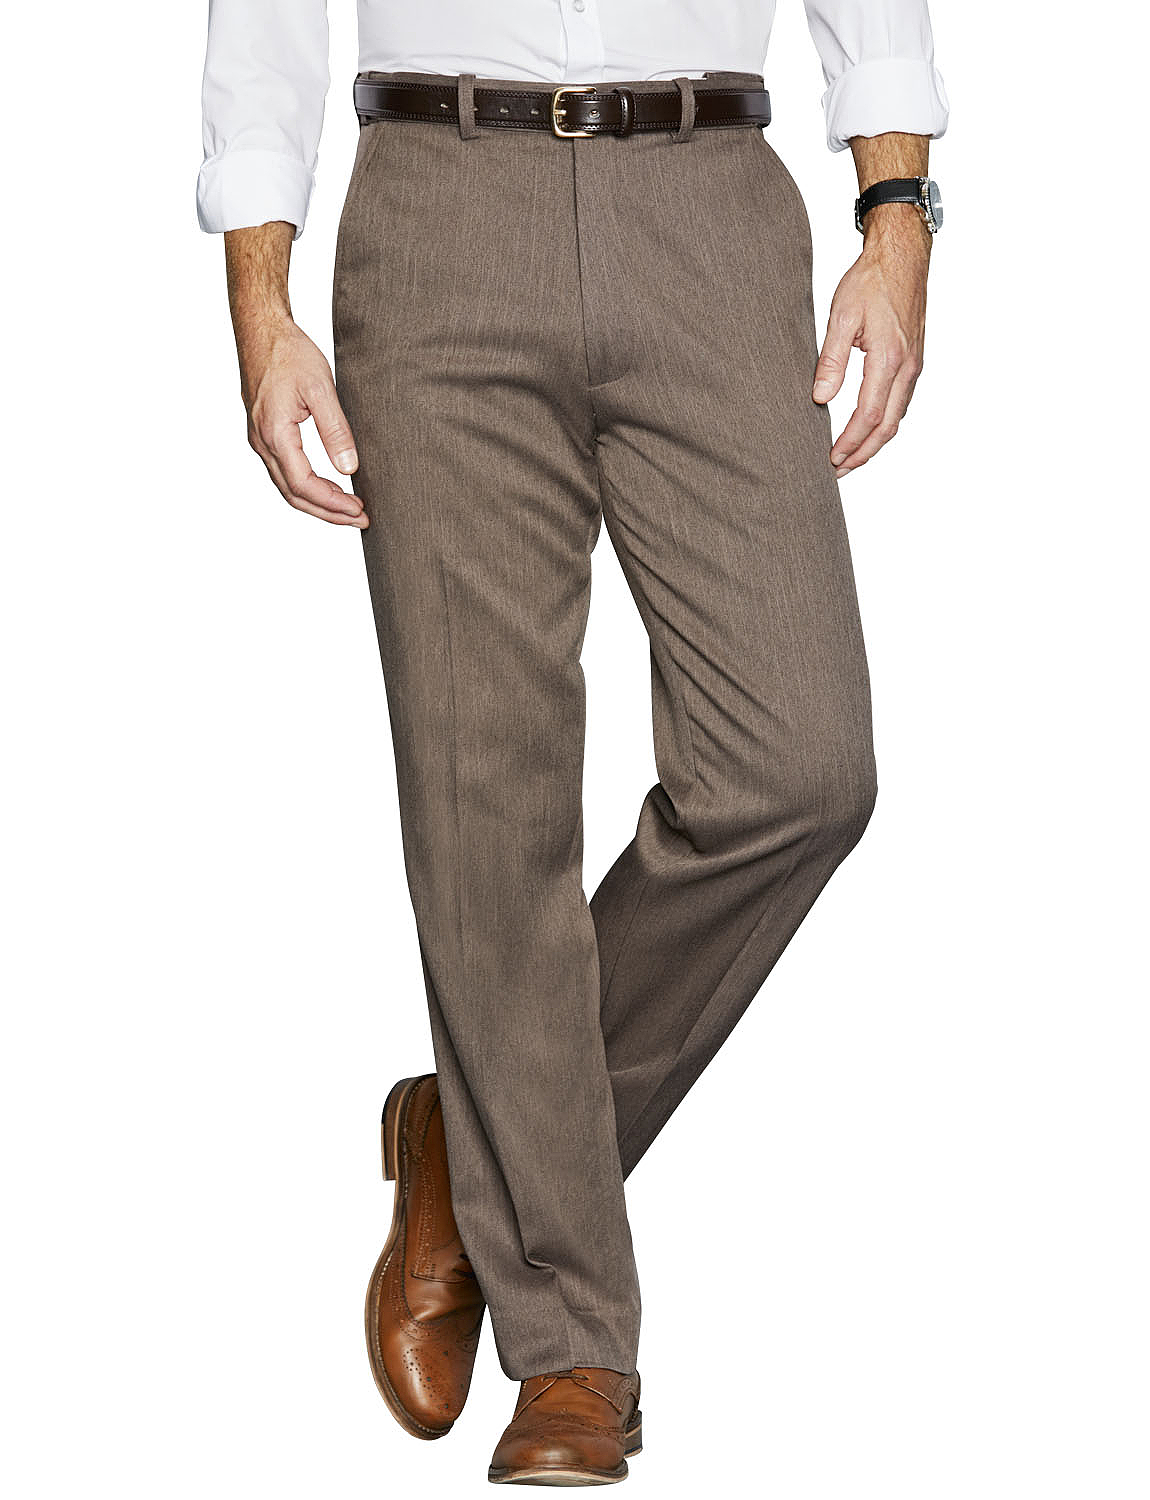 Chums Mens Brushed Warm Handle Formal Trouser Pants